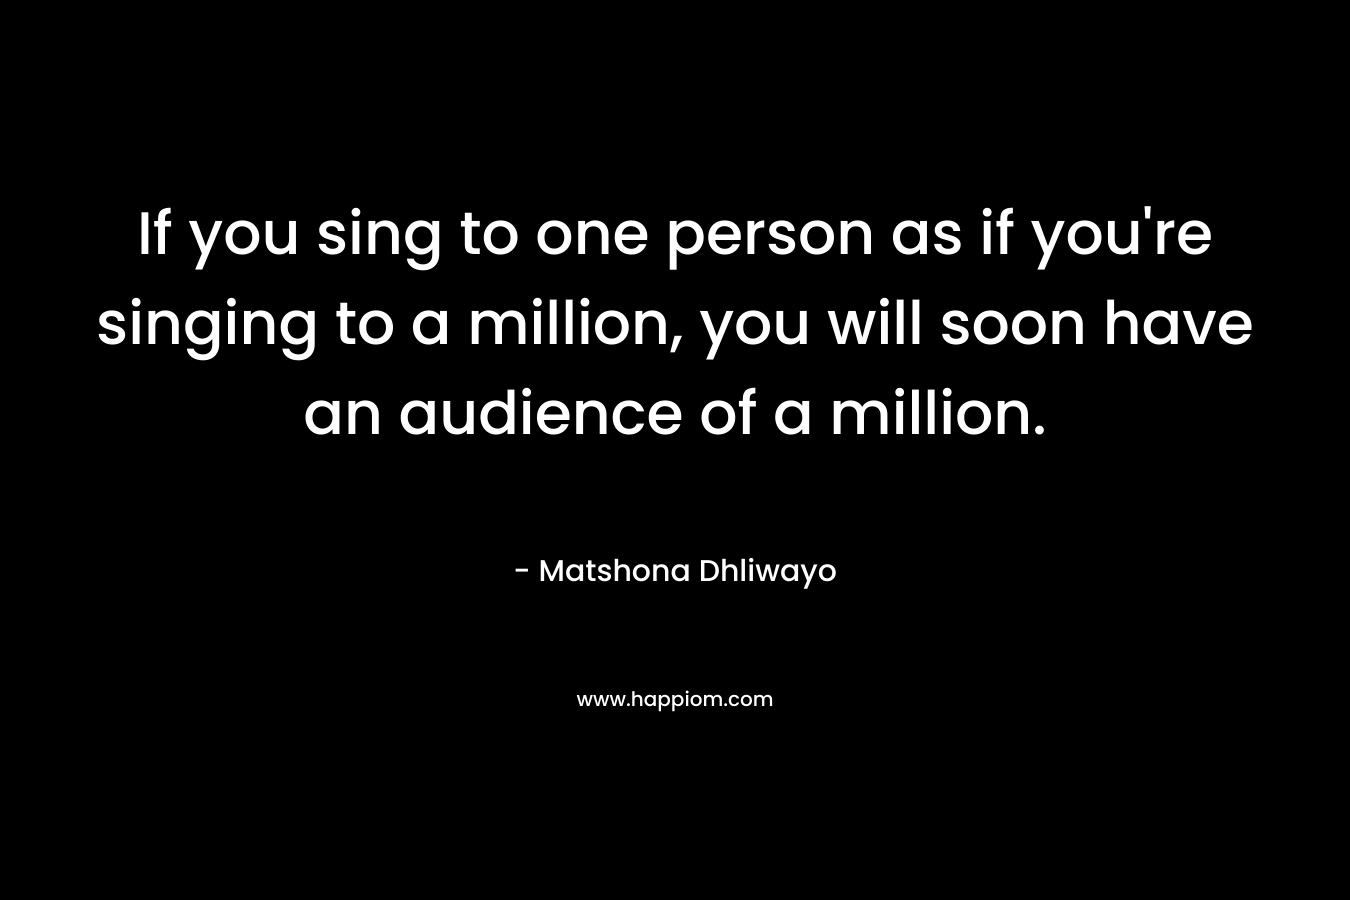 If you sing to one person as if you're singing to a million, you will soon have an audience of a million.